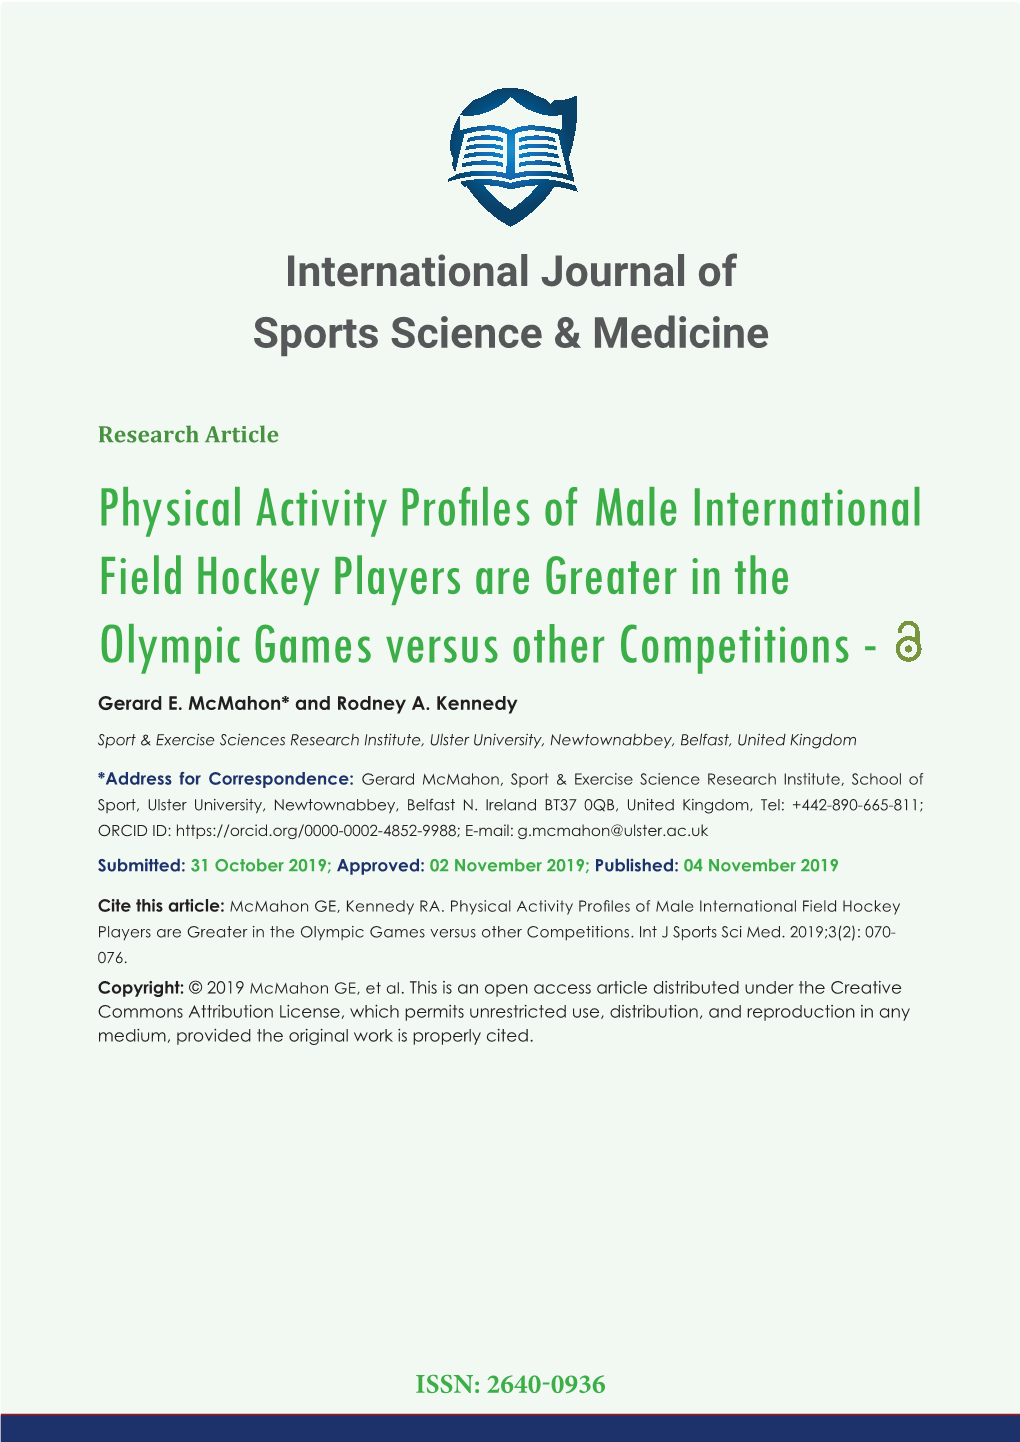 Physical Activity Profiles of Male International Field Hockey Players Are Greater in the Olympic Games Versus Other Competitions